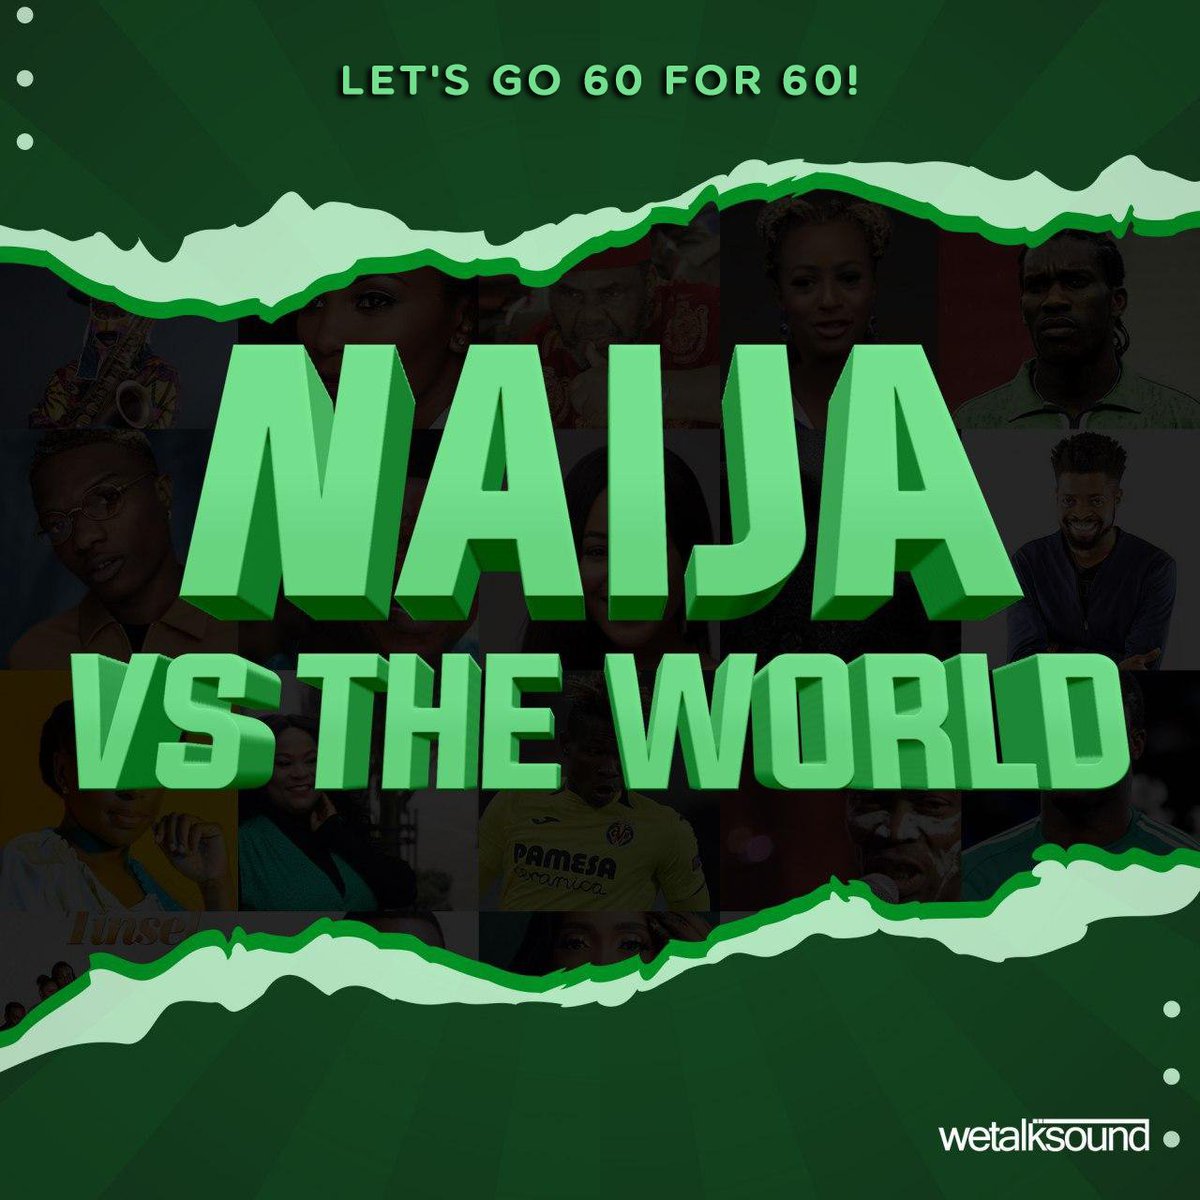 [Thread]  vs Naija vs The World - 60 for 60! Whose side are you on? Vote in the thread below by quoting with your favourite choice!  #NaijavsTheWorld  #NigeriaAt60